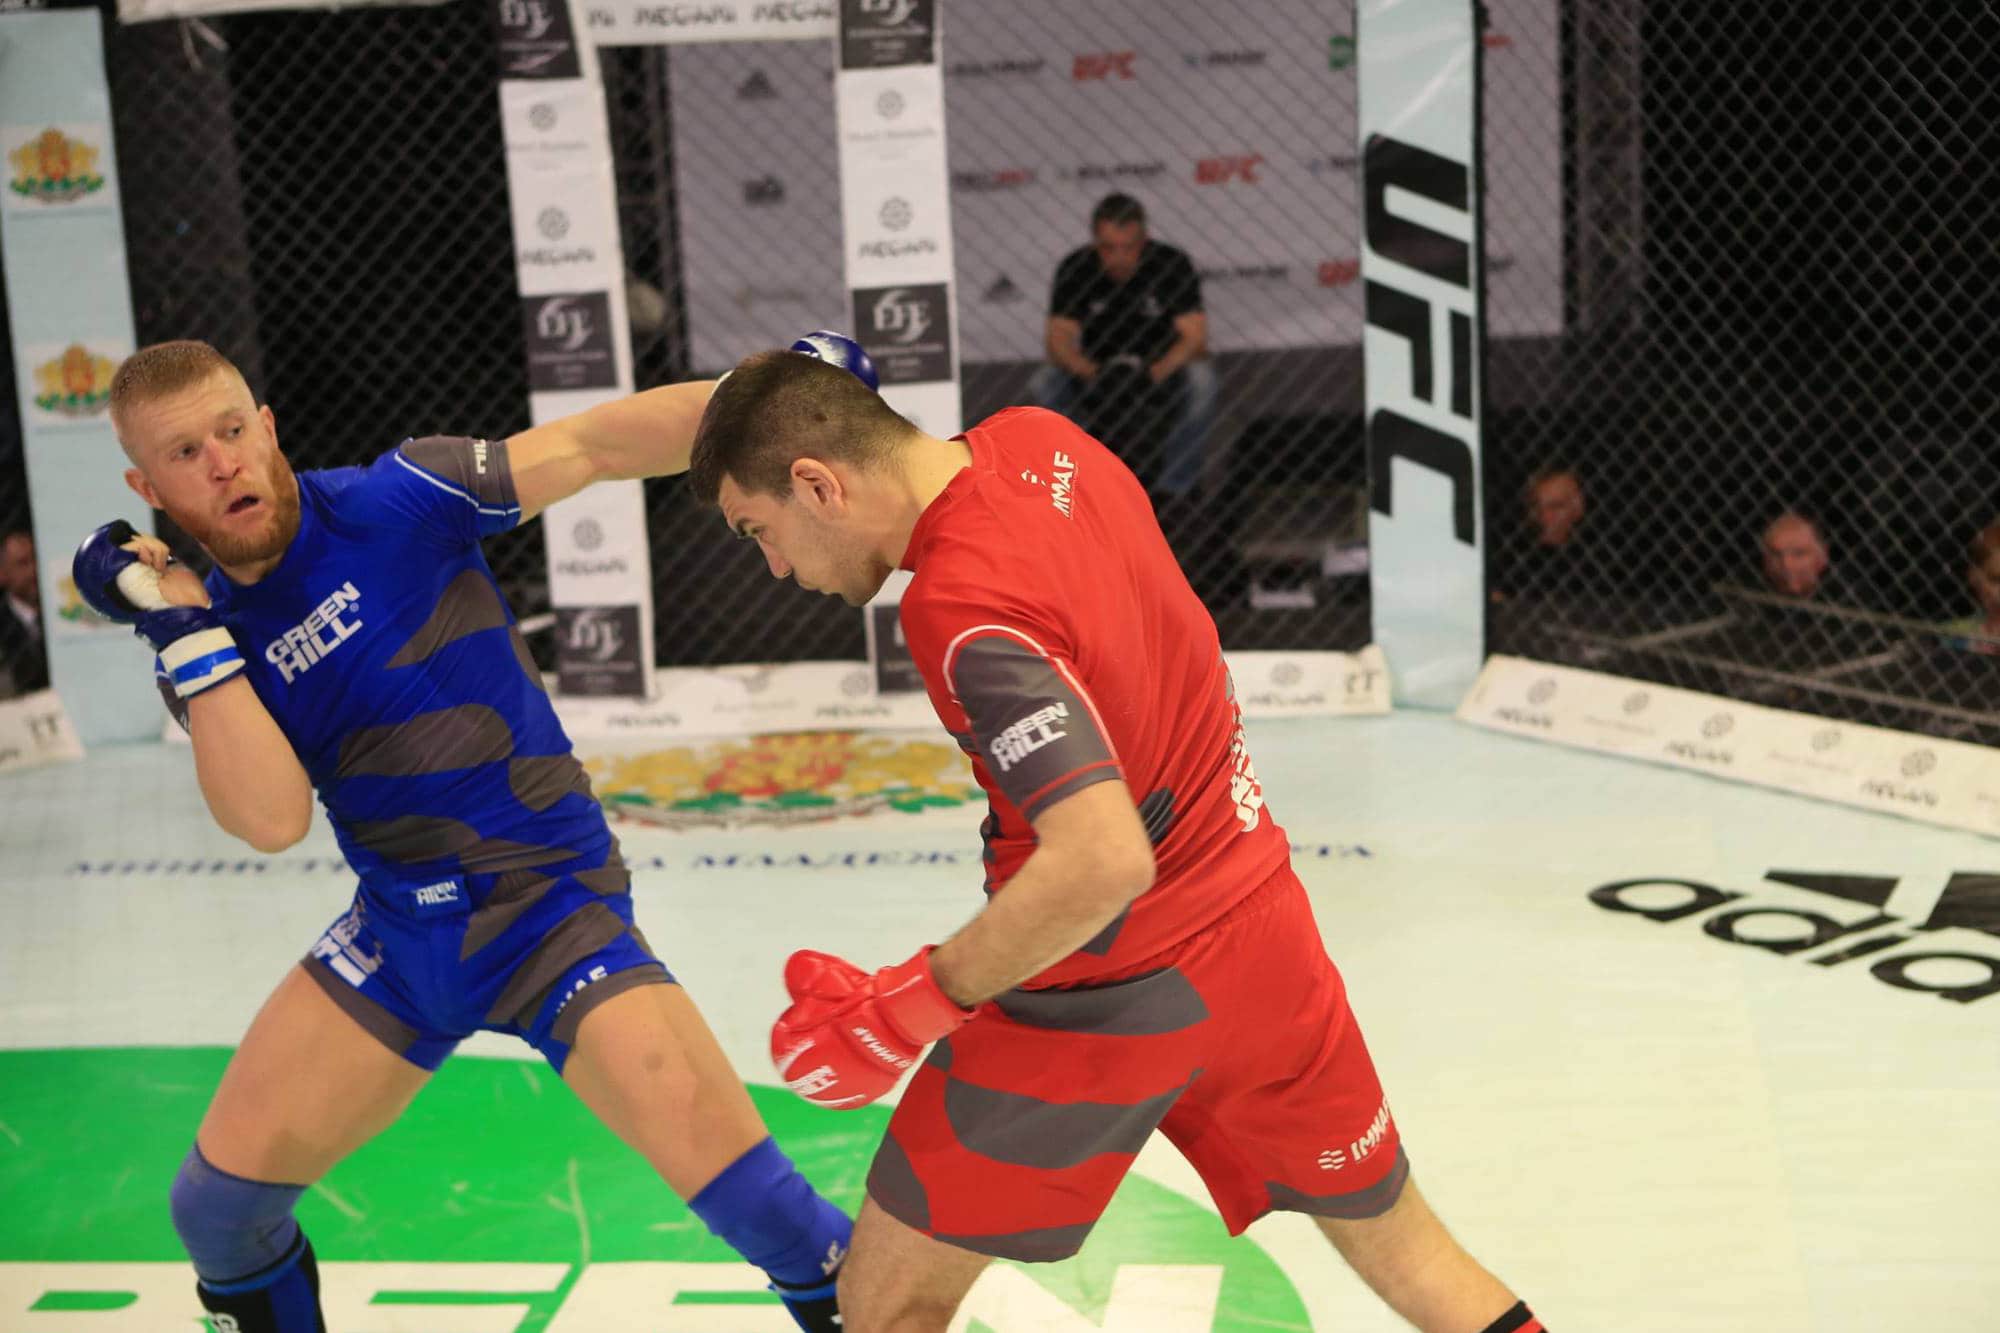 IMMAF Alumni in action at Superior Challenge 22